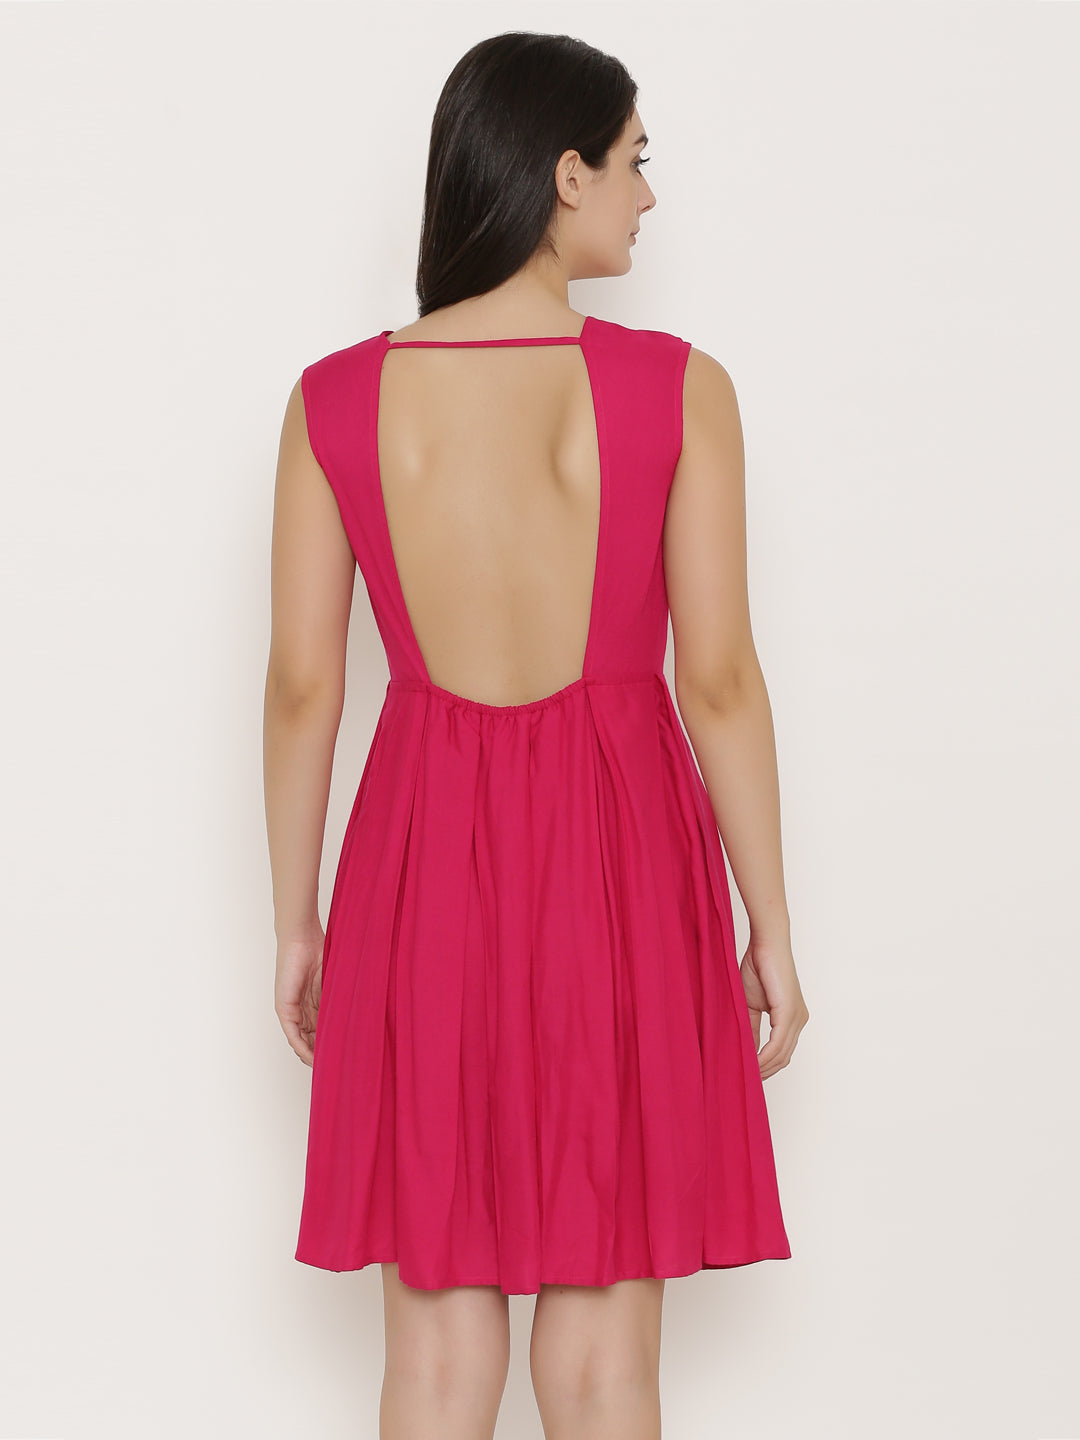 Backless box pleat Dress with Placement Block Print